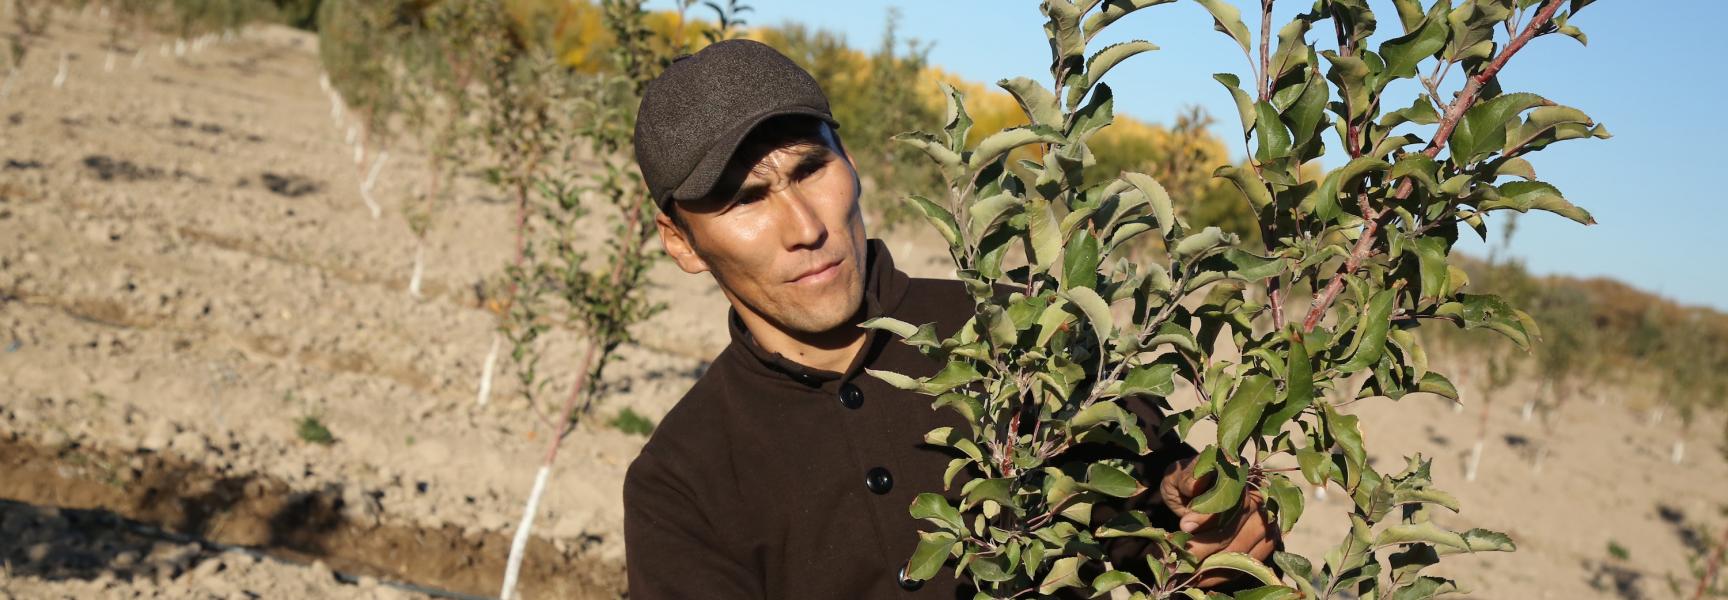 Man tending to trees in his orchard in Aral Sea area of Uzbekistan